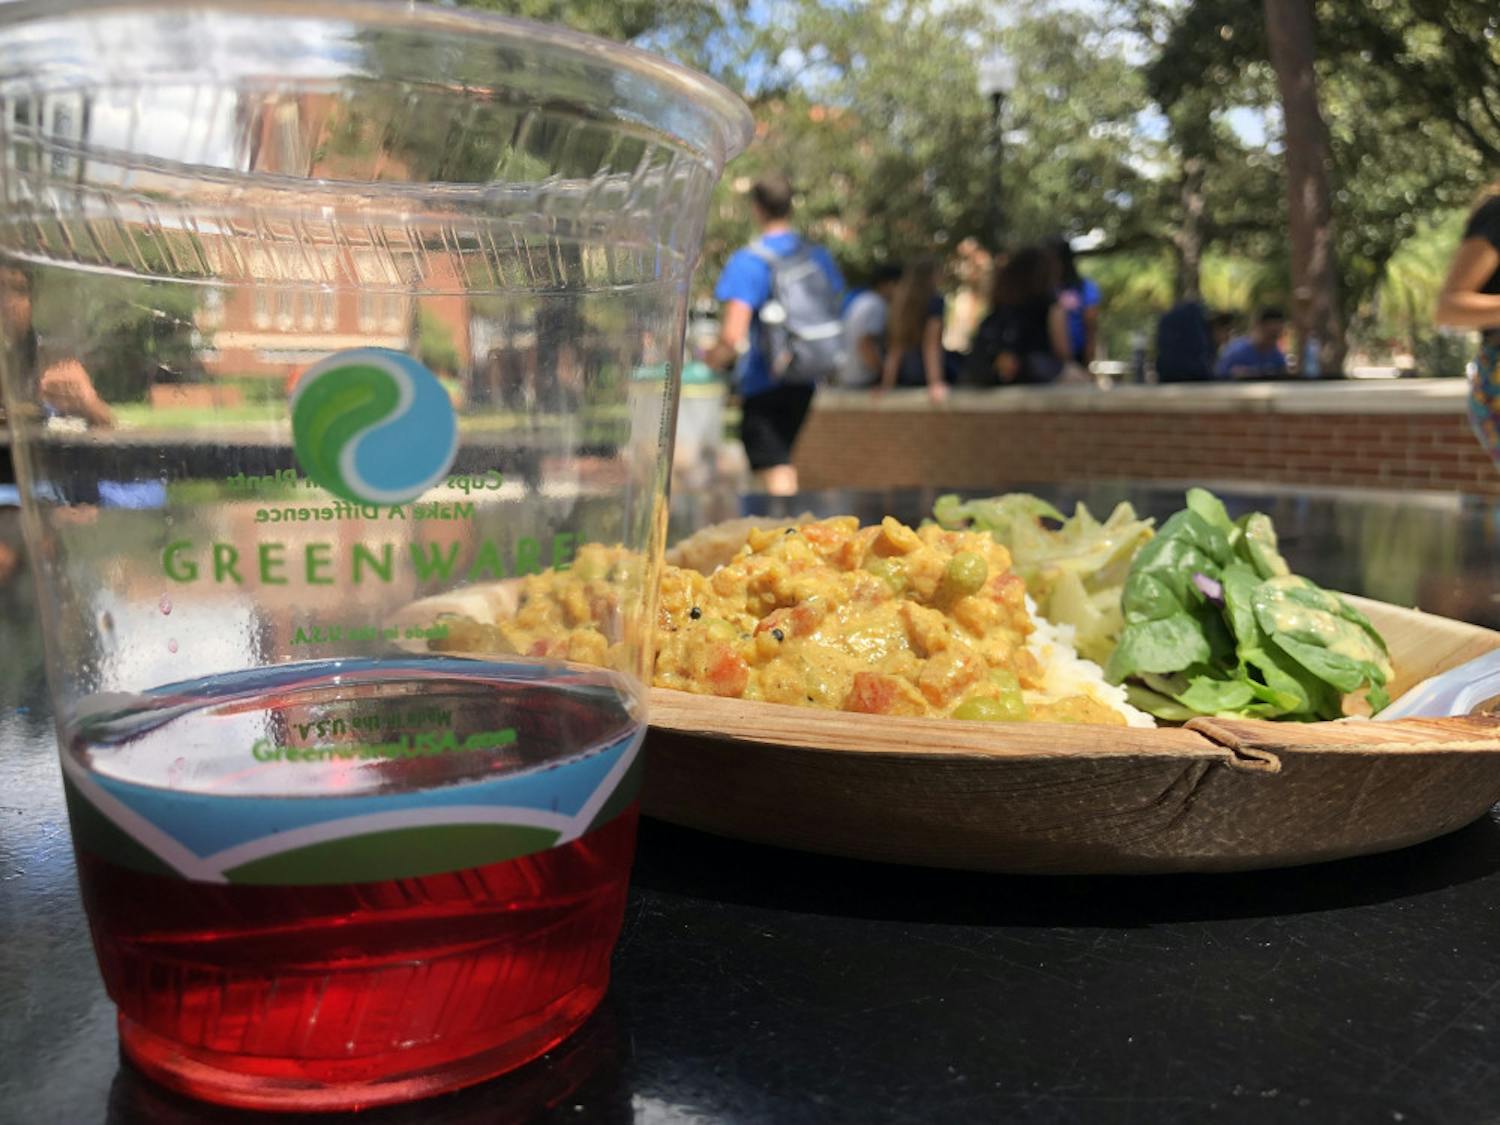 Krishna Lunch is served using all compostable materials, including cups, plates, forks and napkins. It will serve tea in plastic compost able cups until its usual paper cups are back in stock. 